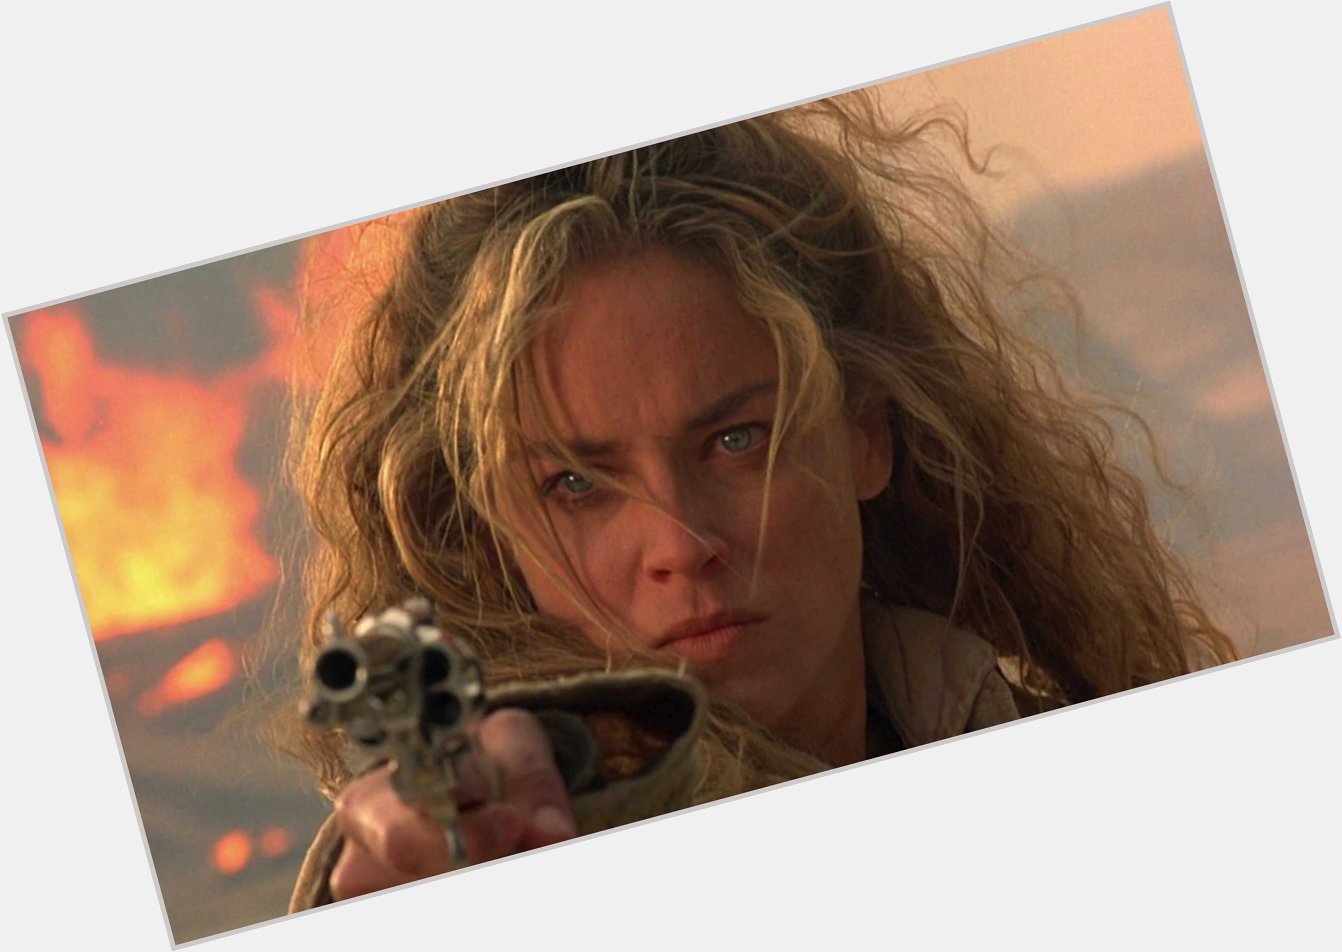 Happy 62nd birthday to Sharon Stone, star of TOTAL RECALL, SPHERE, BASIC INSTINCT, THE QUICK AND THE DEAD, and more! 